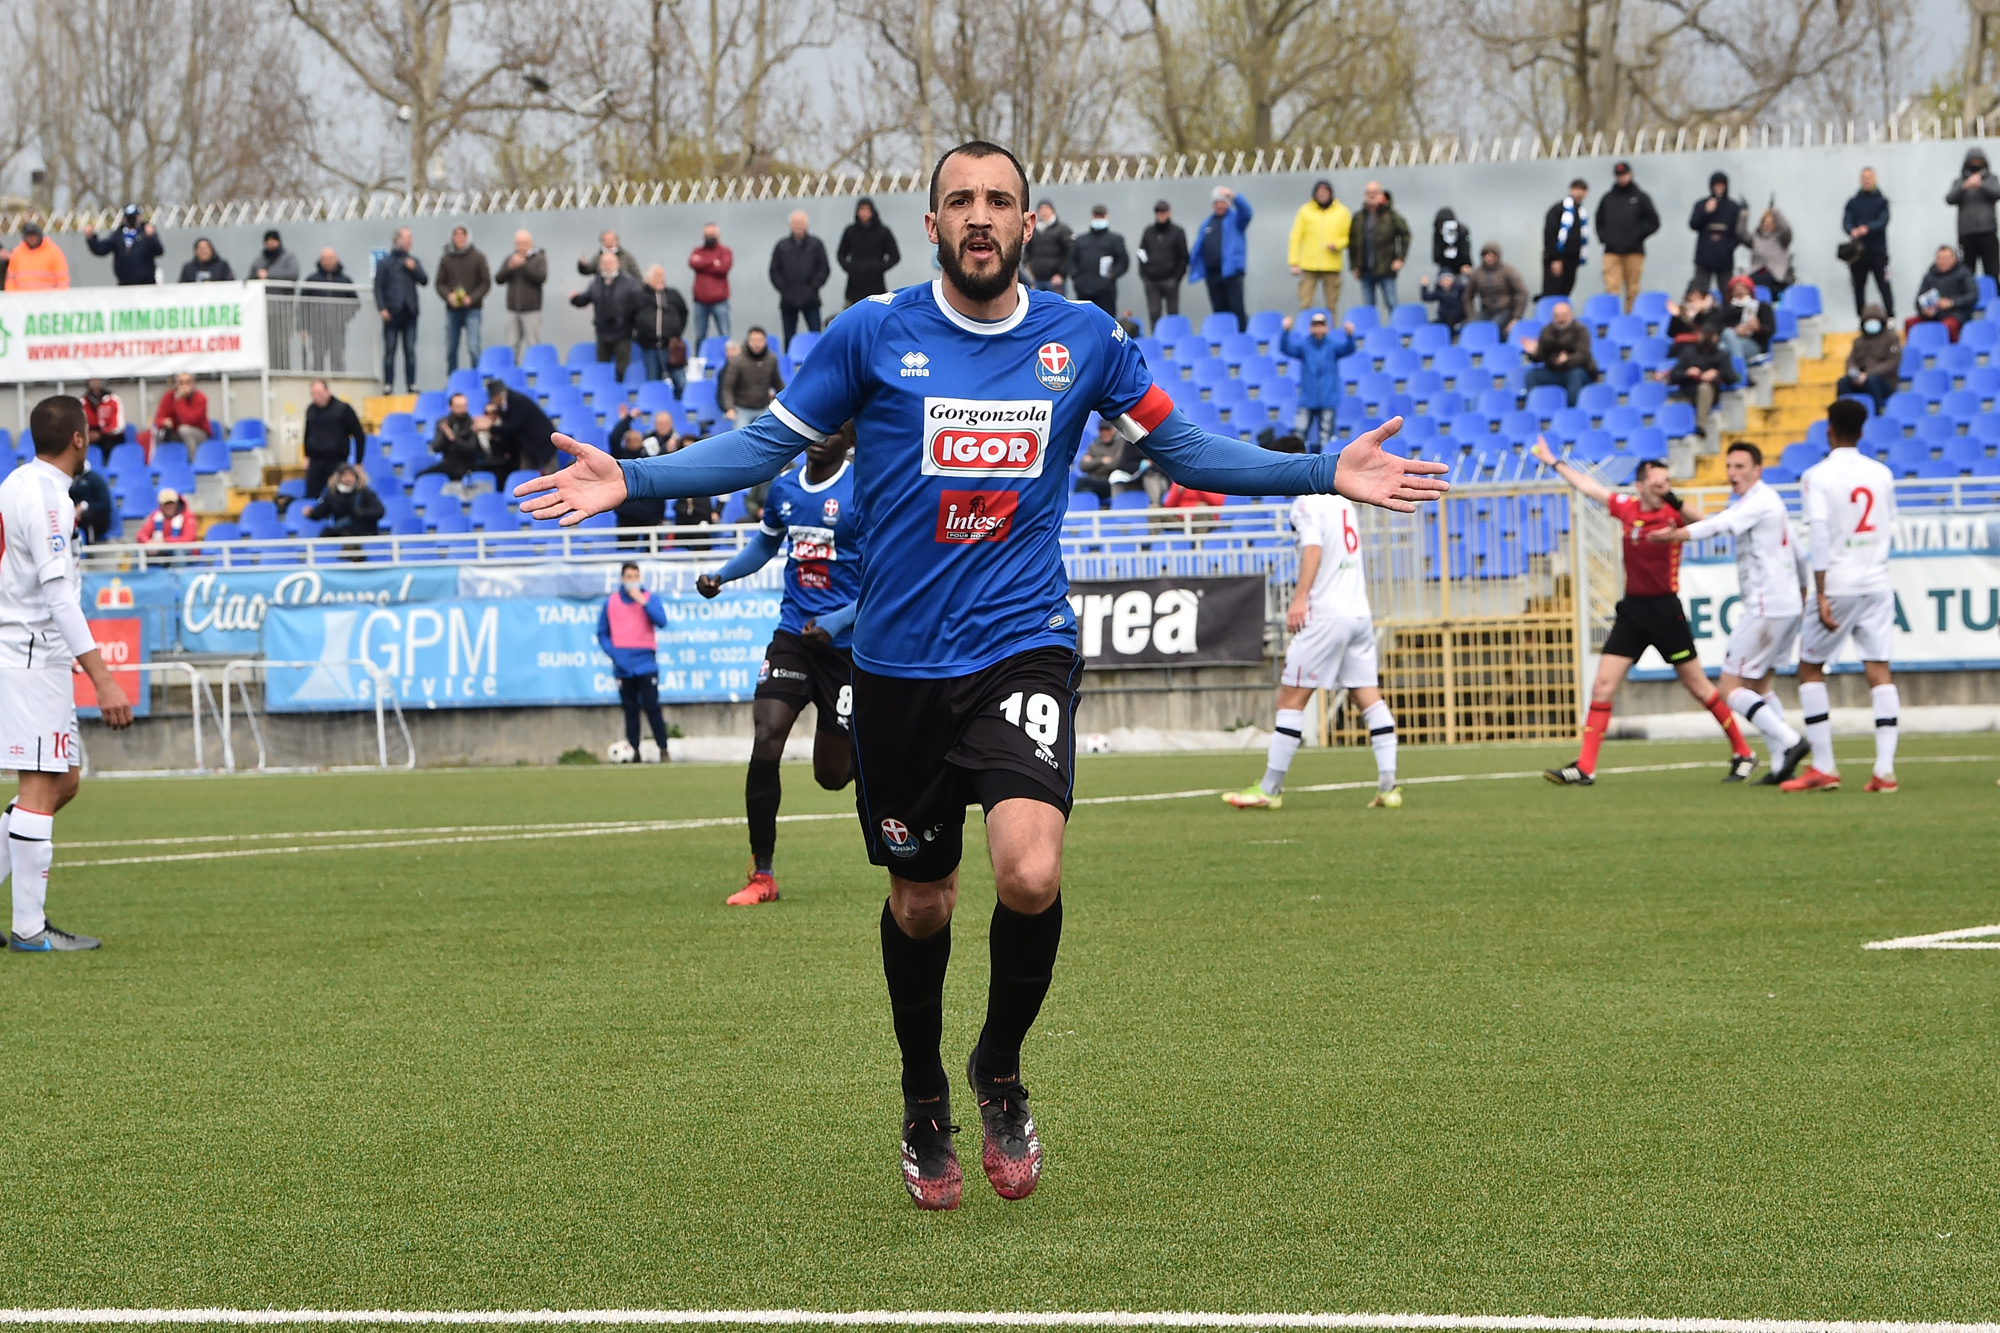 Read more about the article Novara-Caronnese 3-0 | Tabellino del match